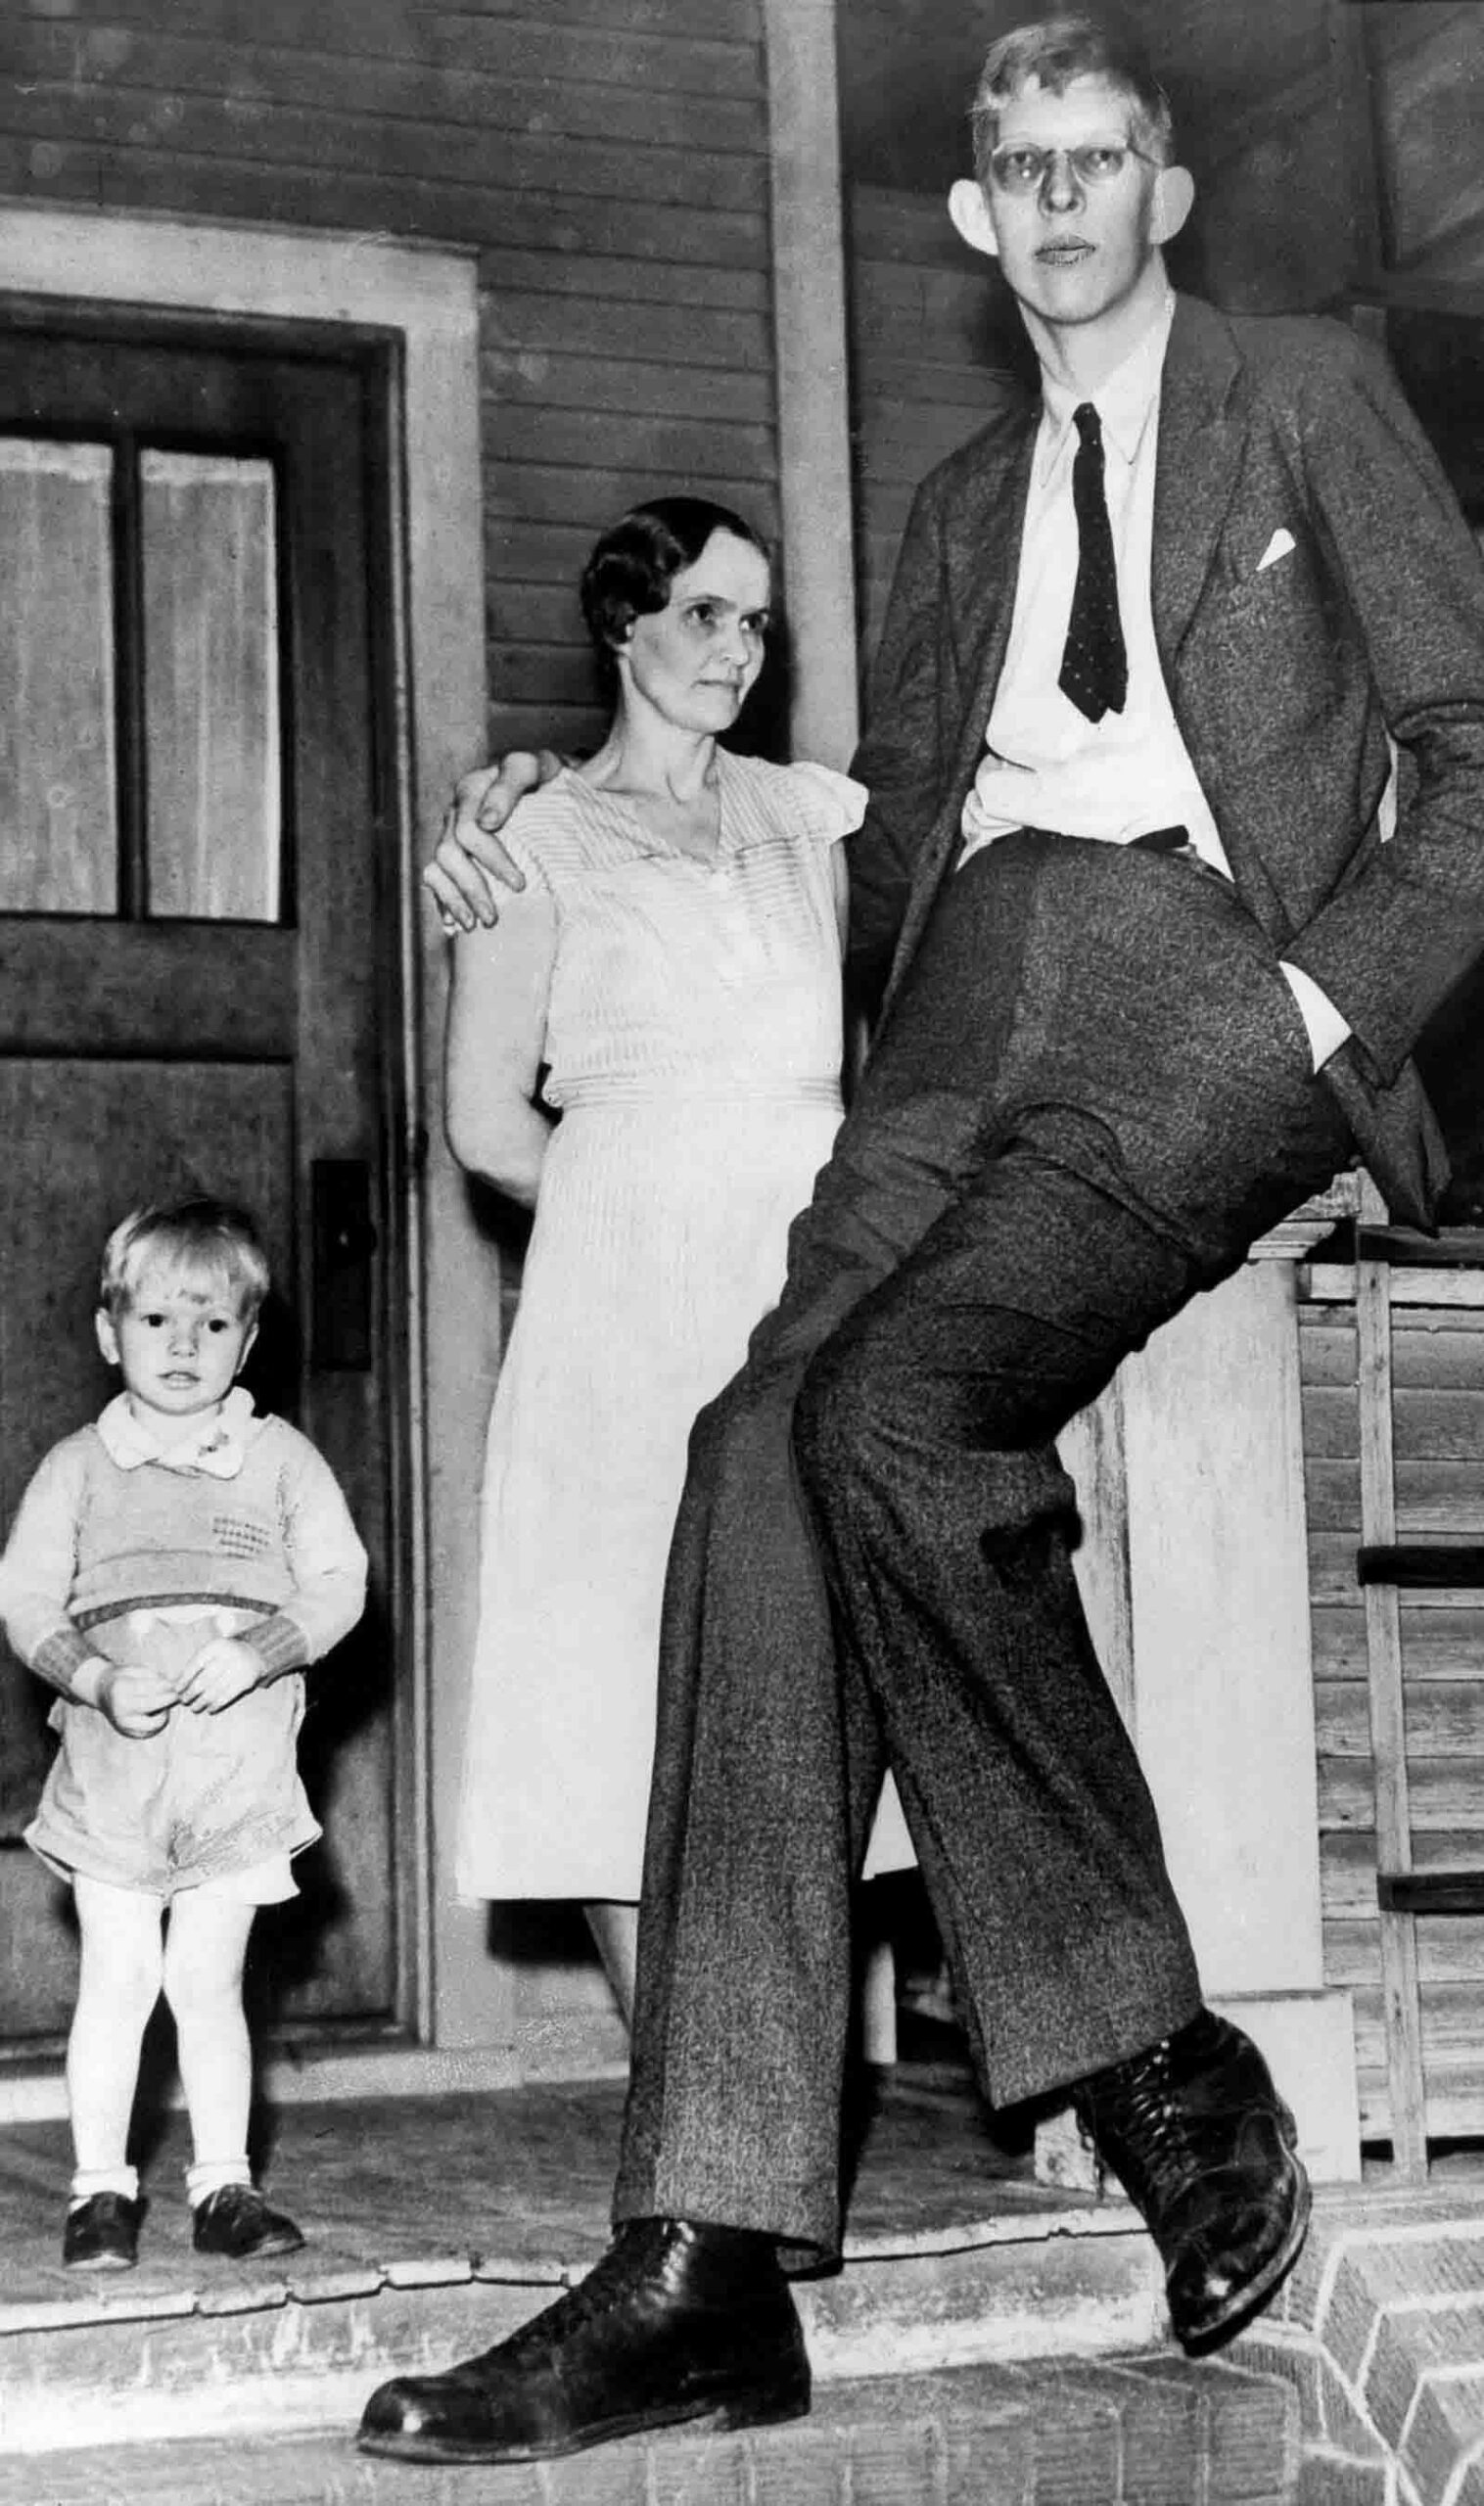 Wadlow with his mother and brother, 1935.